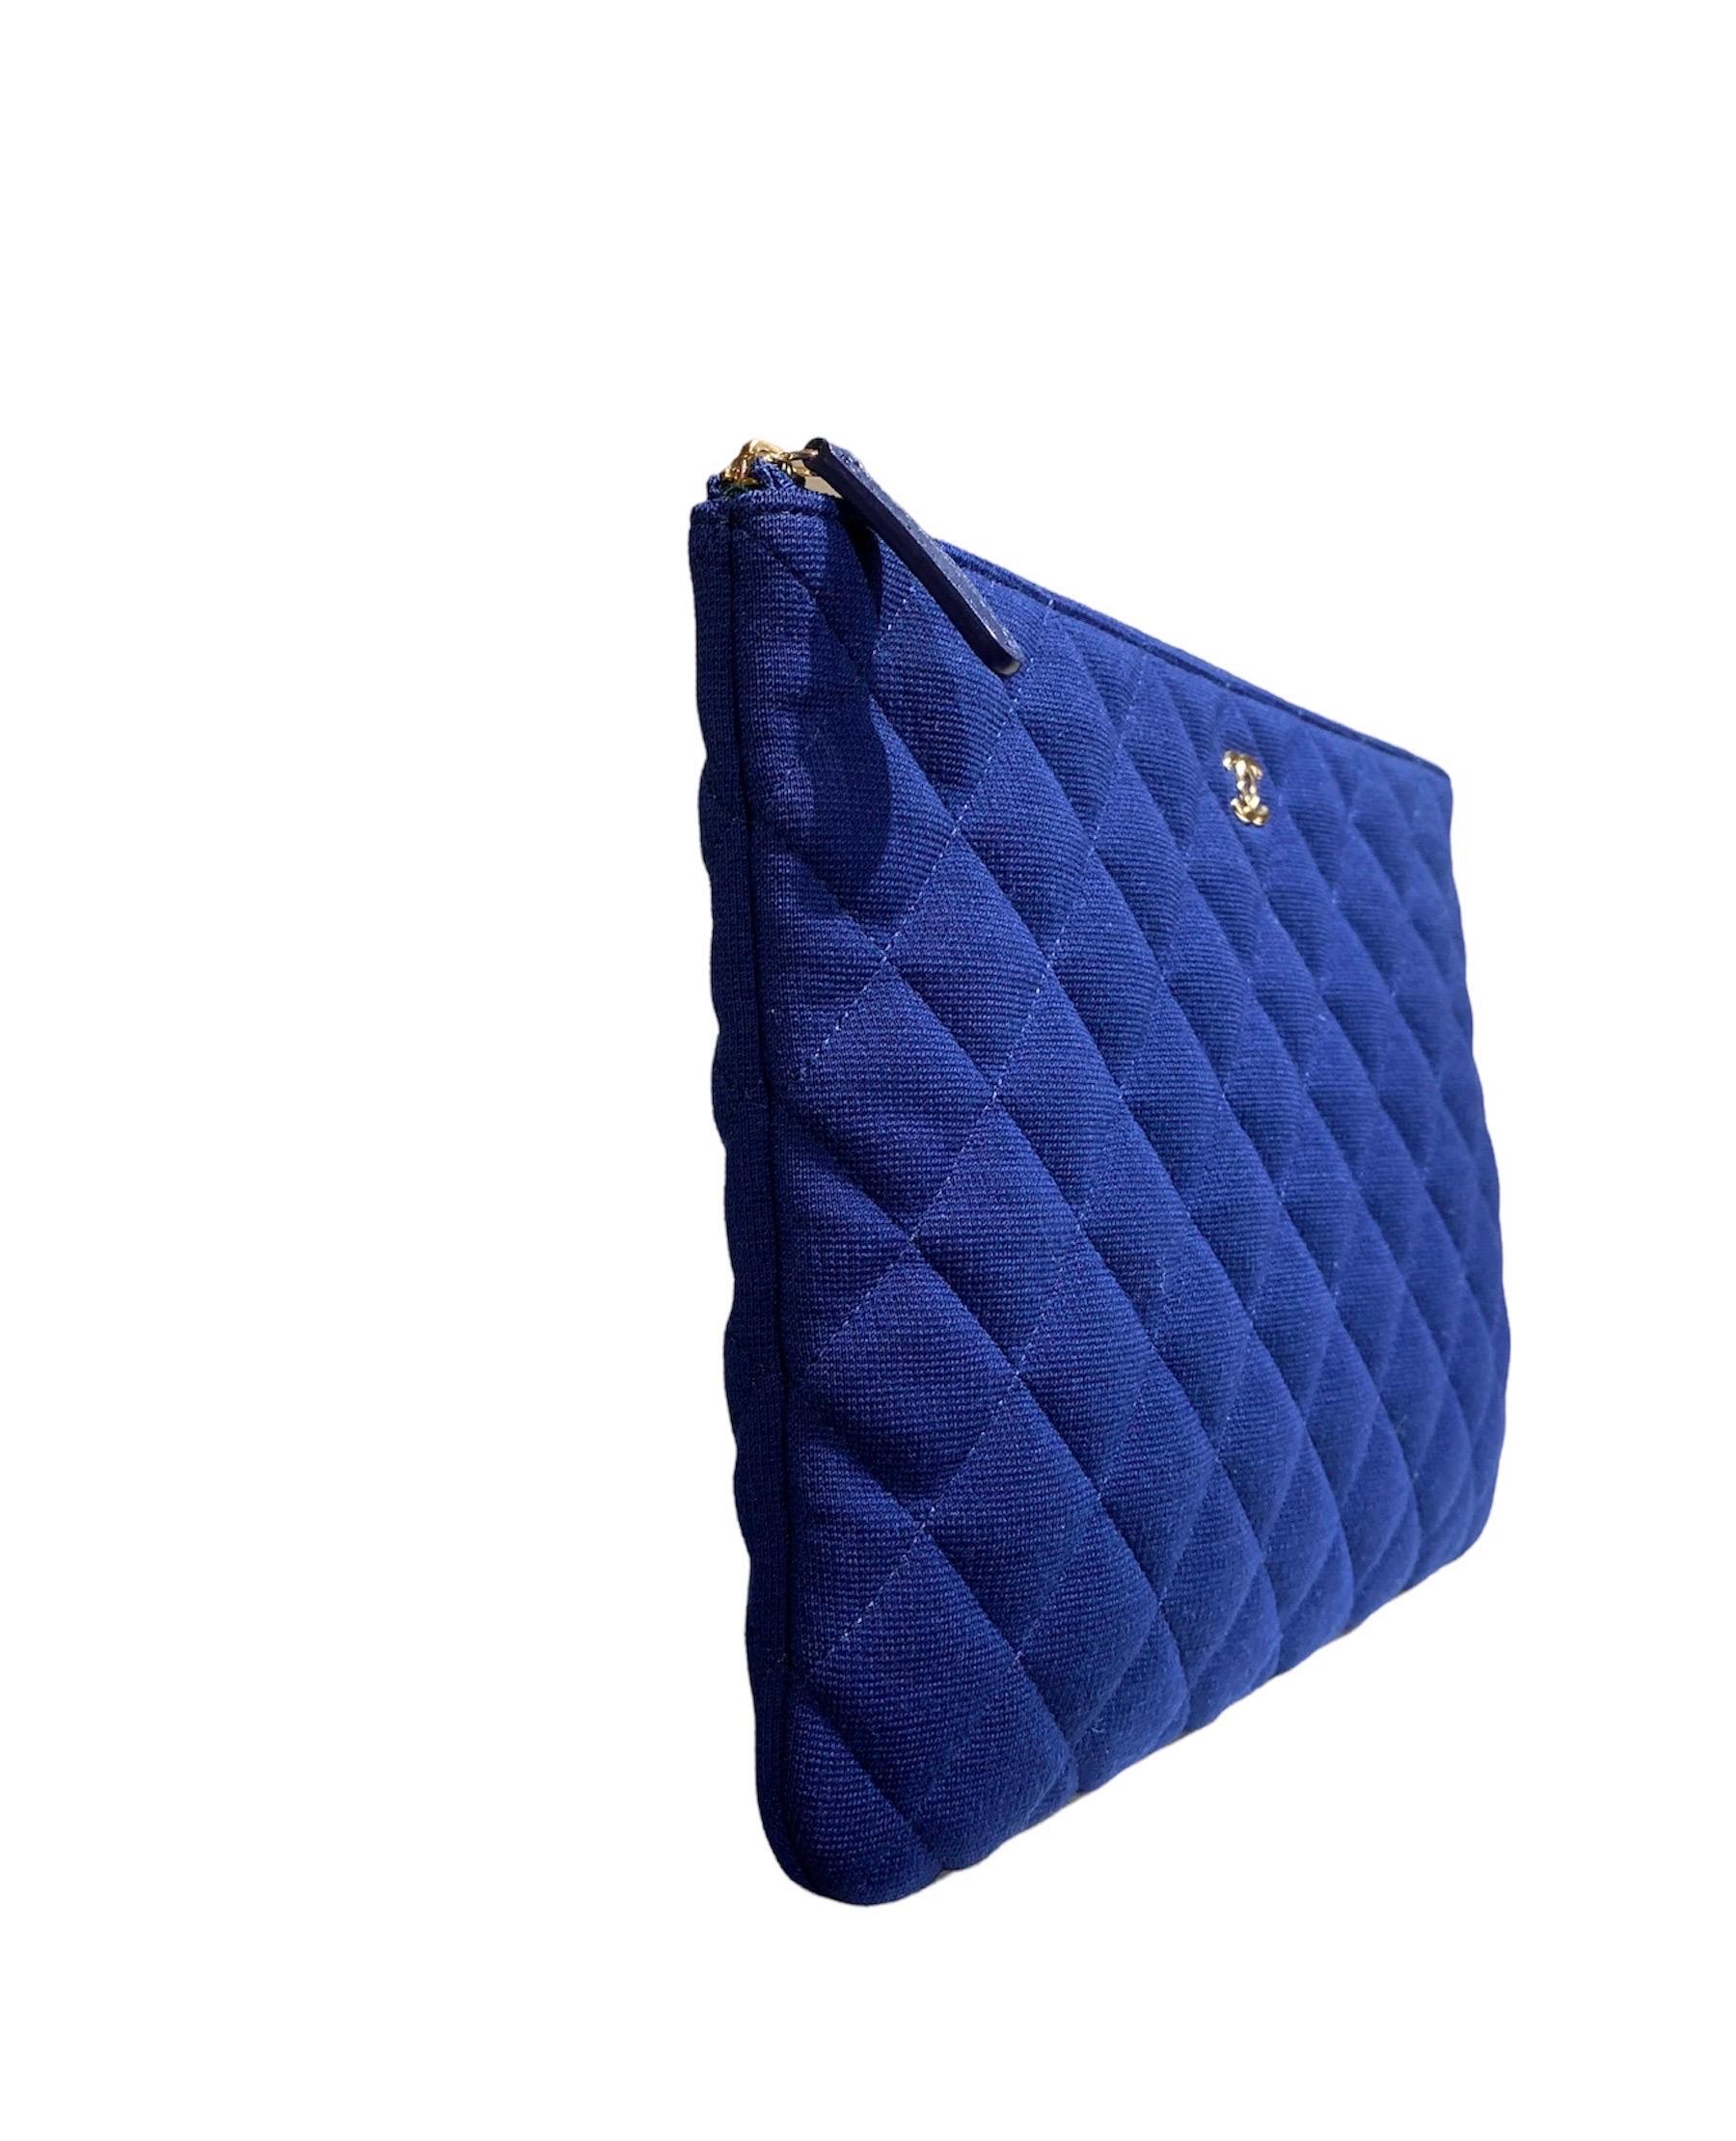 Clutch signed Chanel, model carried by hand, made of blue quilted fabric, with silver hardware.

Equipped with a zip closure, internally lined in green canvas, roomy for the essentials.

It is not equipped with any type of handle, it has an internal